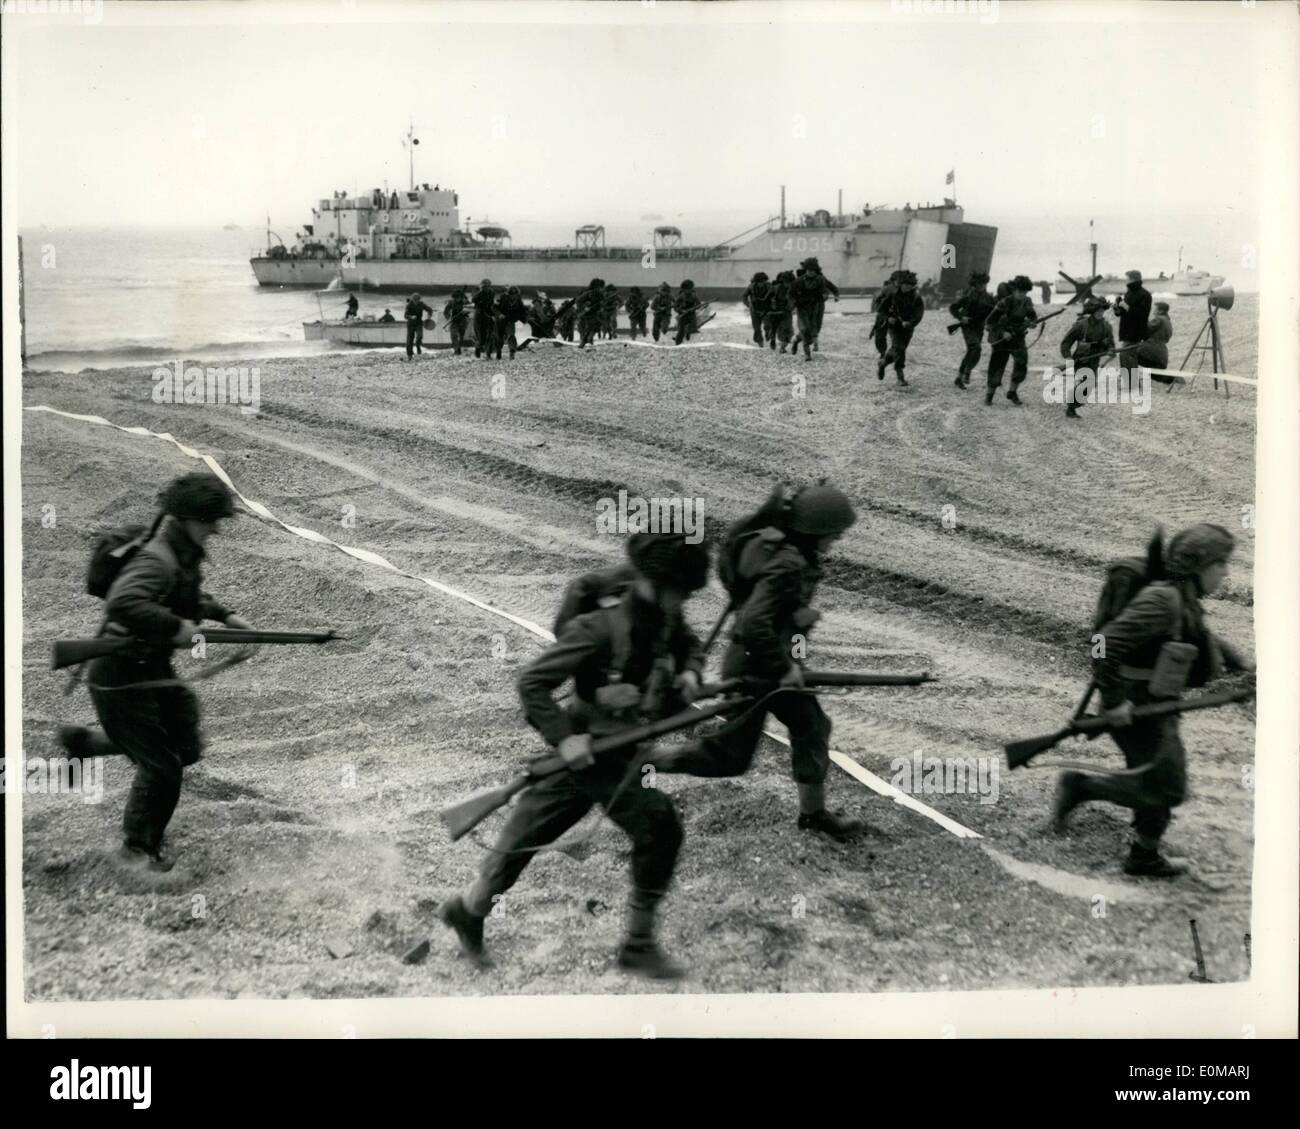 May 05, 1954 - Combine Forces Amphibious Demonstration. Runaground V, the annual amphibious and cliff assault demonstration staged for the benefit of the students of the Royal Navy, Army and Royal Air Force Staff Colleges, is taking place in the Solent Area today, tomorrow and Wednesday. Taking part are motor minesweepers, motor launched and tank landing craft of the Royal Navy, landing and raiding craft of the Royal Marines, R.N. and R.A.F. ir squadrons and strong R.M. and Army units Stock Photo